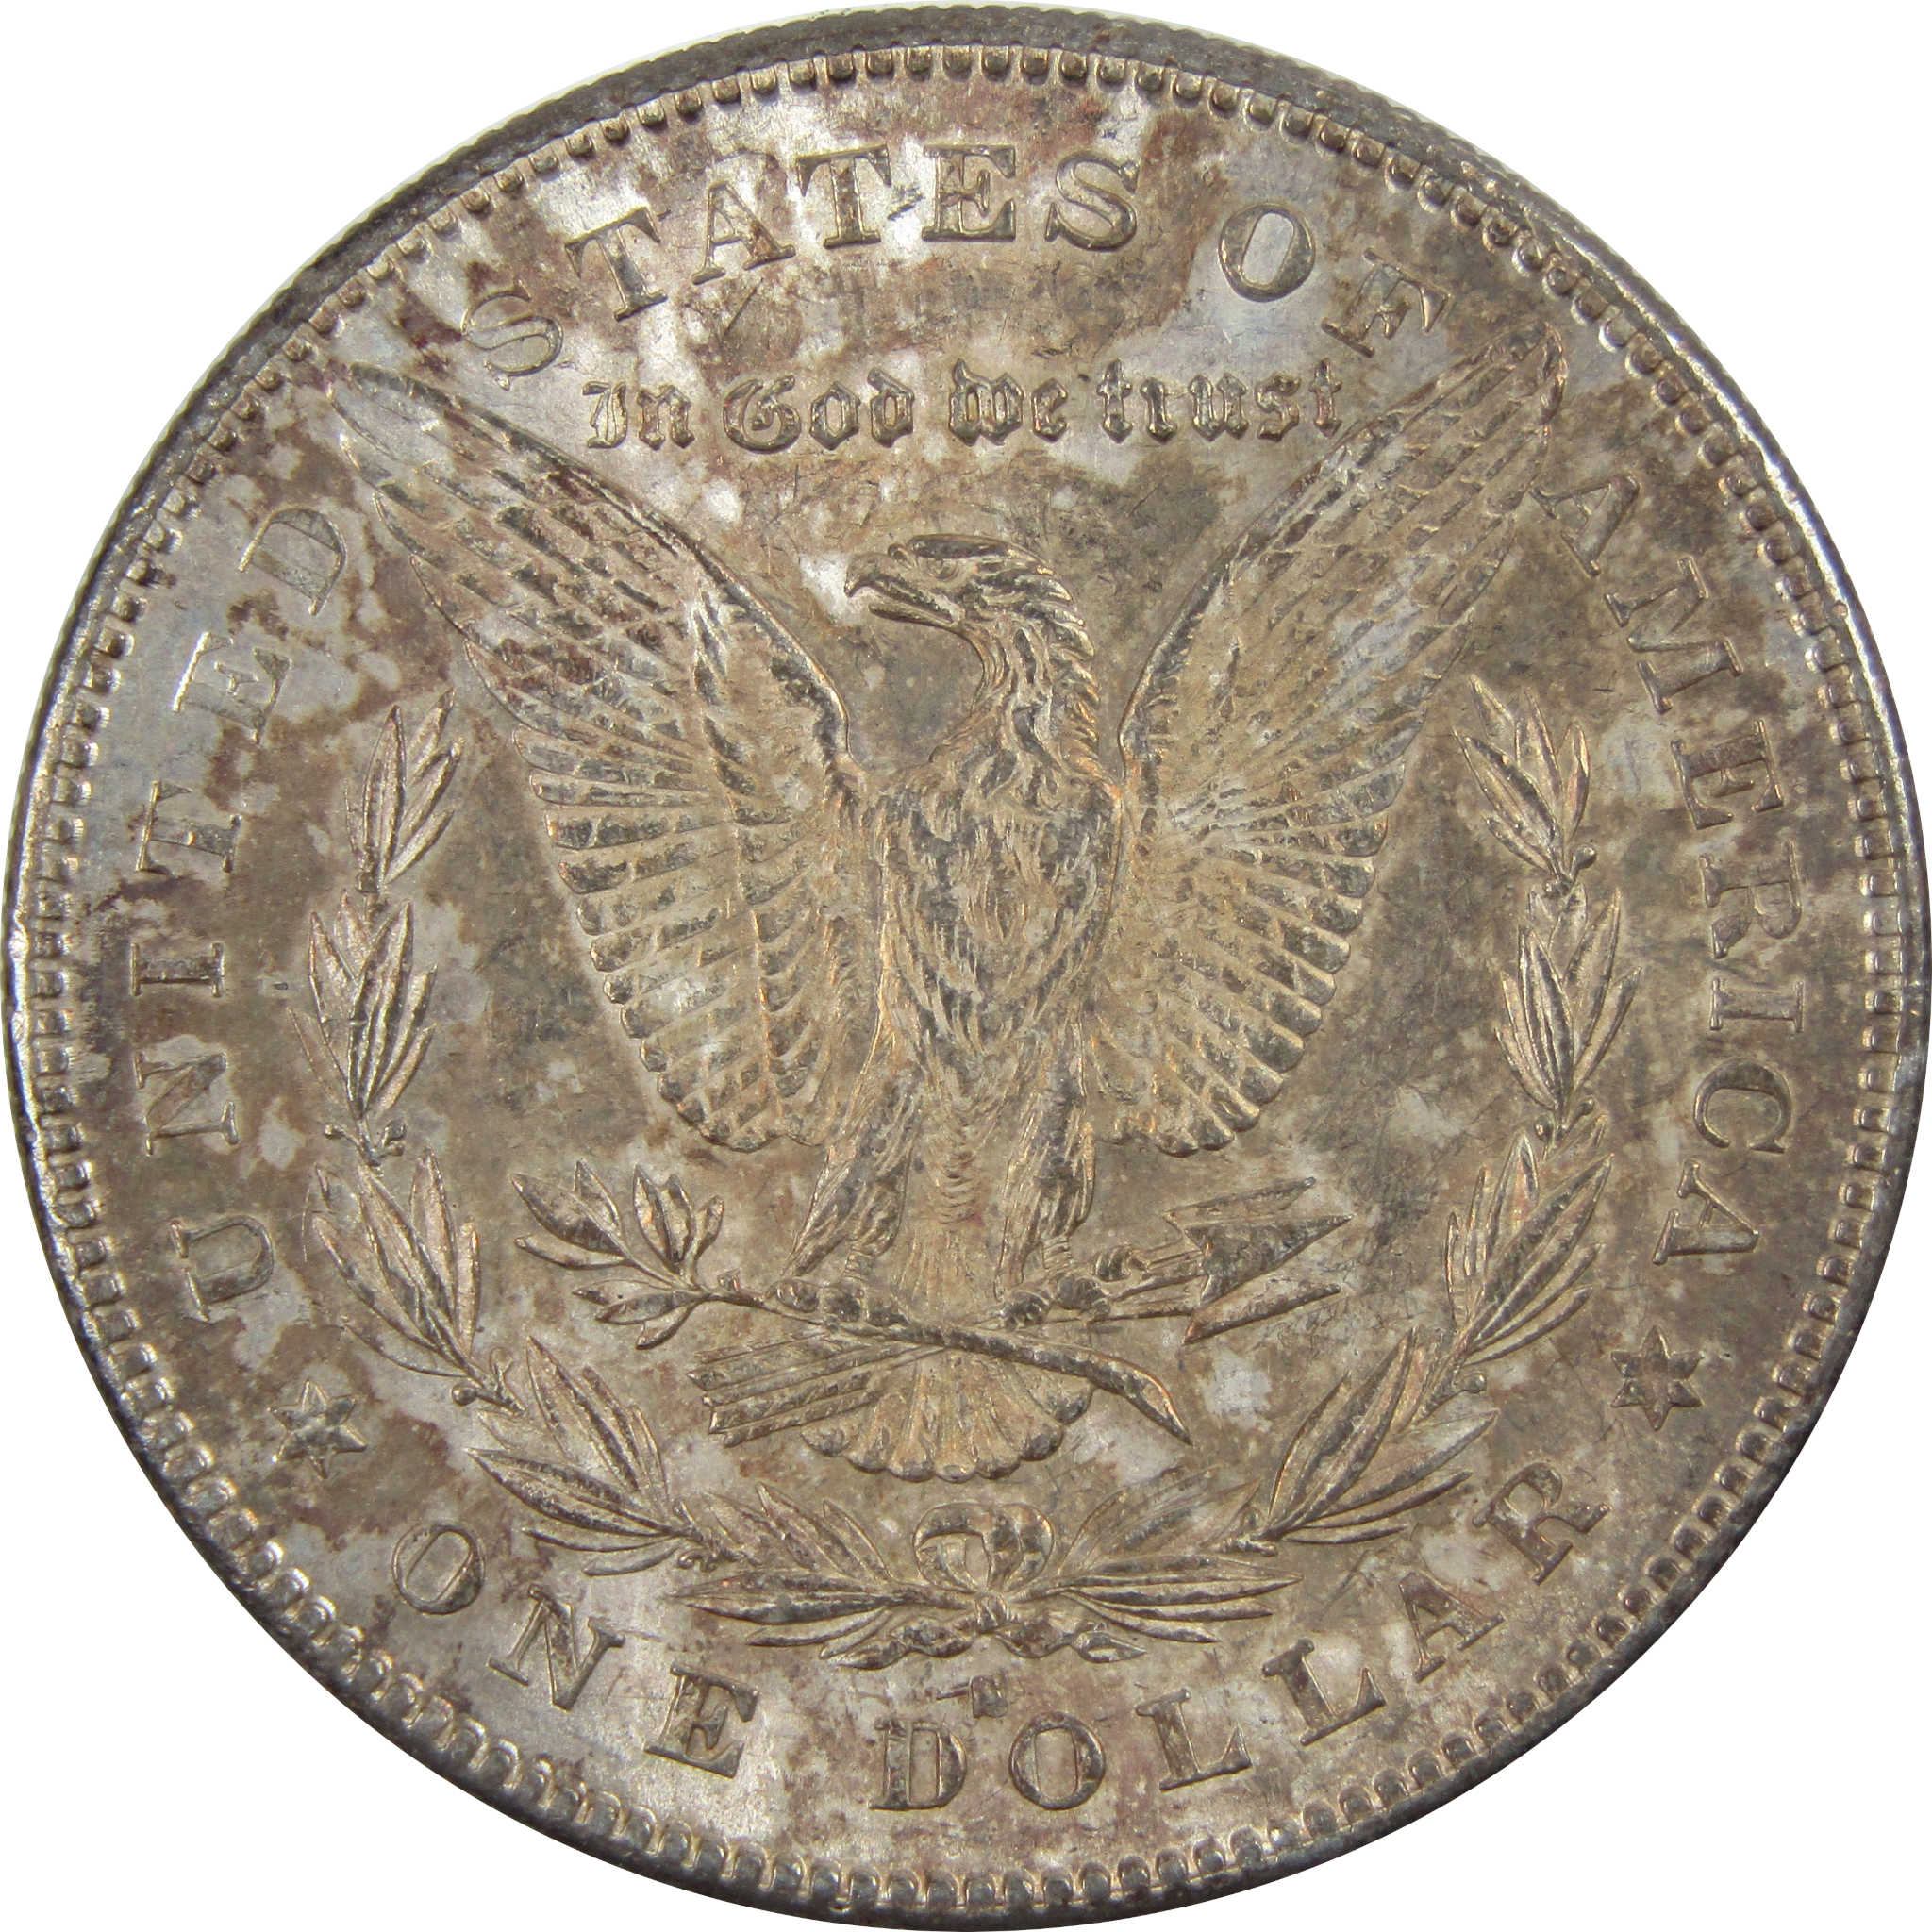 1878 S Morgan Dollar XF EF Extremely Fine 90% Silver $1 Coin SKU:I7009 - Morgan coin - Morgan silver dollar - Morgan silver dollar for sale - Profile Coins &amp; Collectibles